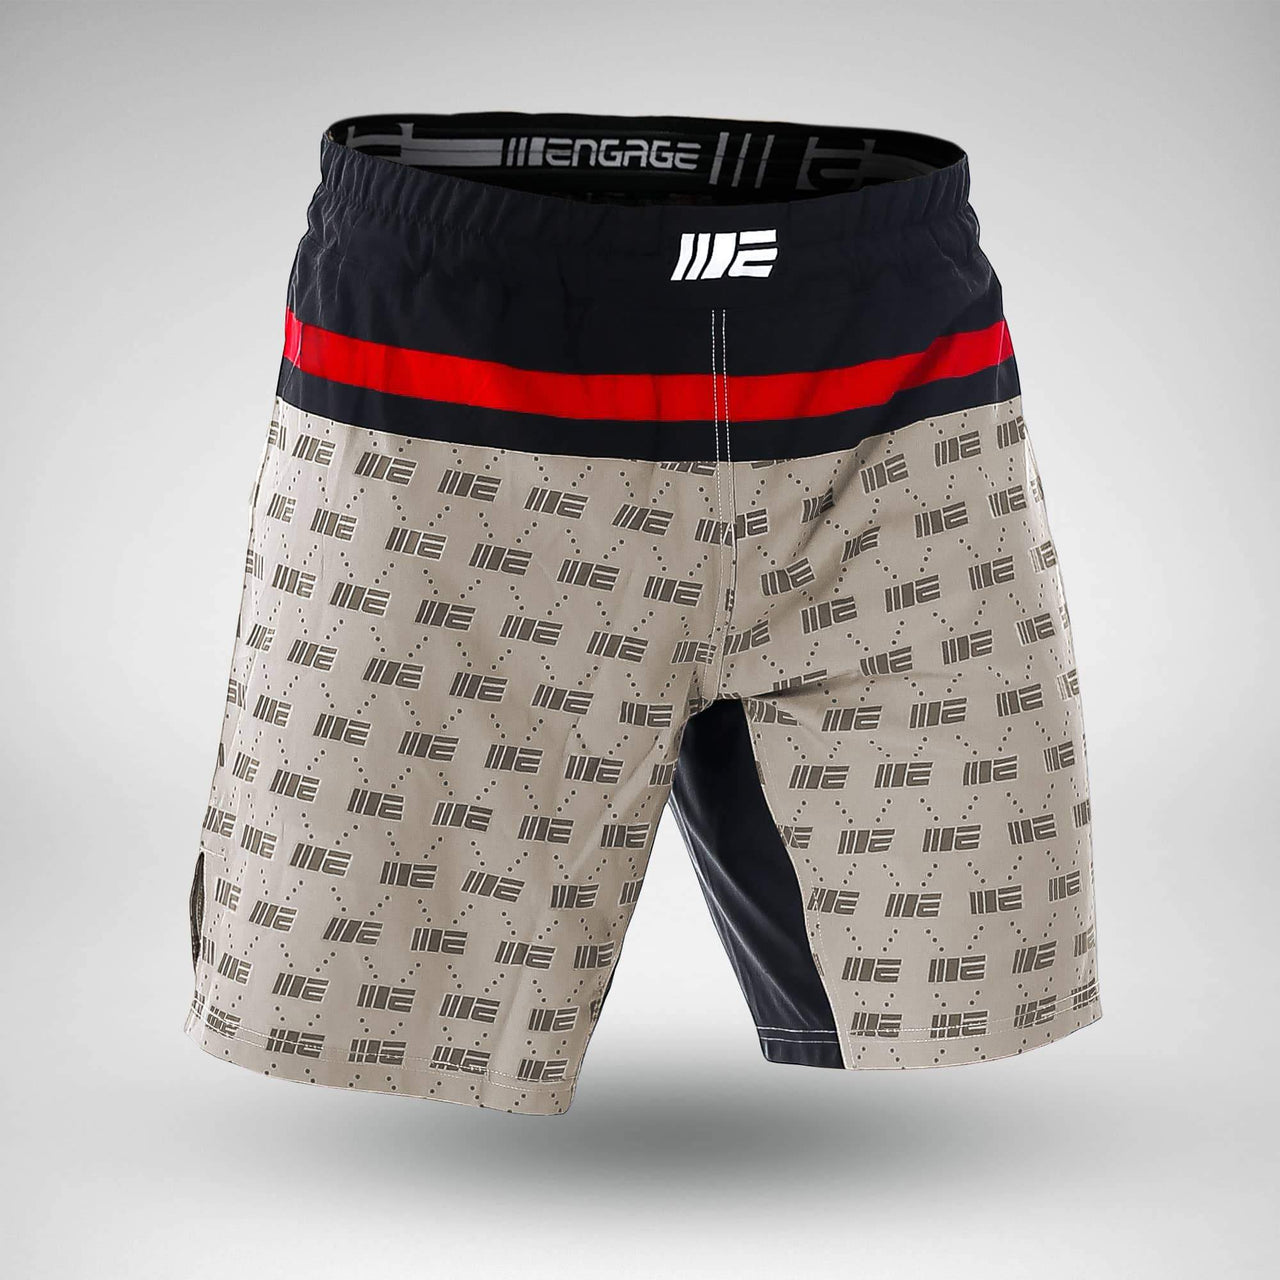 ENGAGE / LUXE SERIES MMA GRAPPLING SHORTS - ファイトショーツ